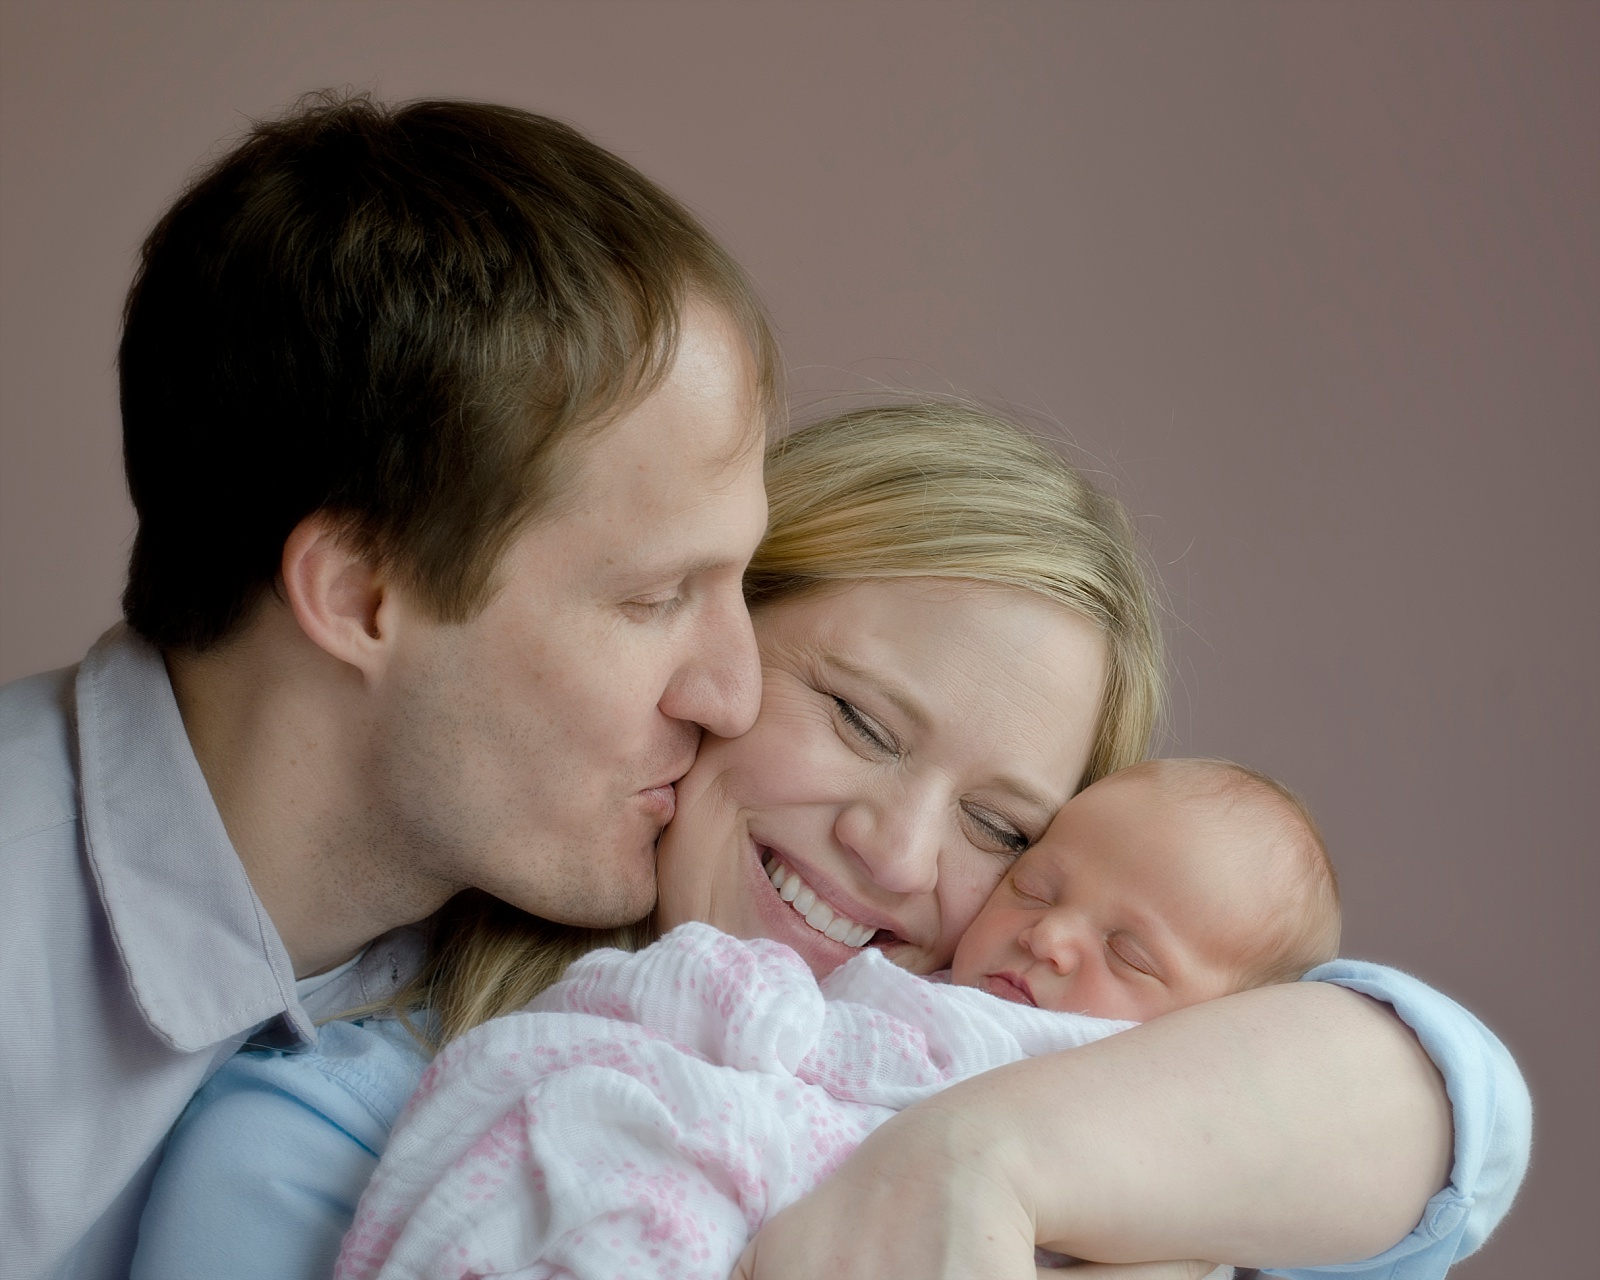 Newborn Girl with parents Lifestyle Photography Session in Pink Nursery